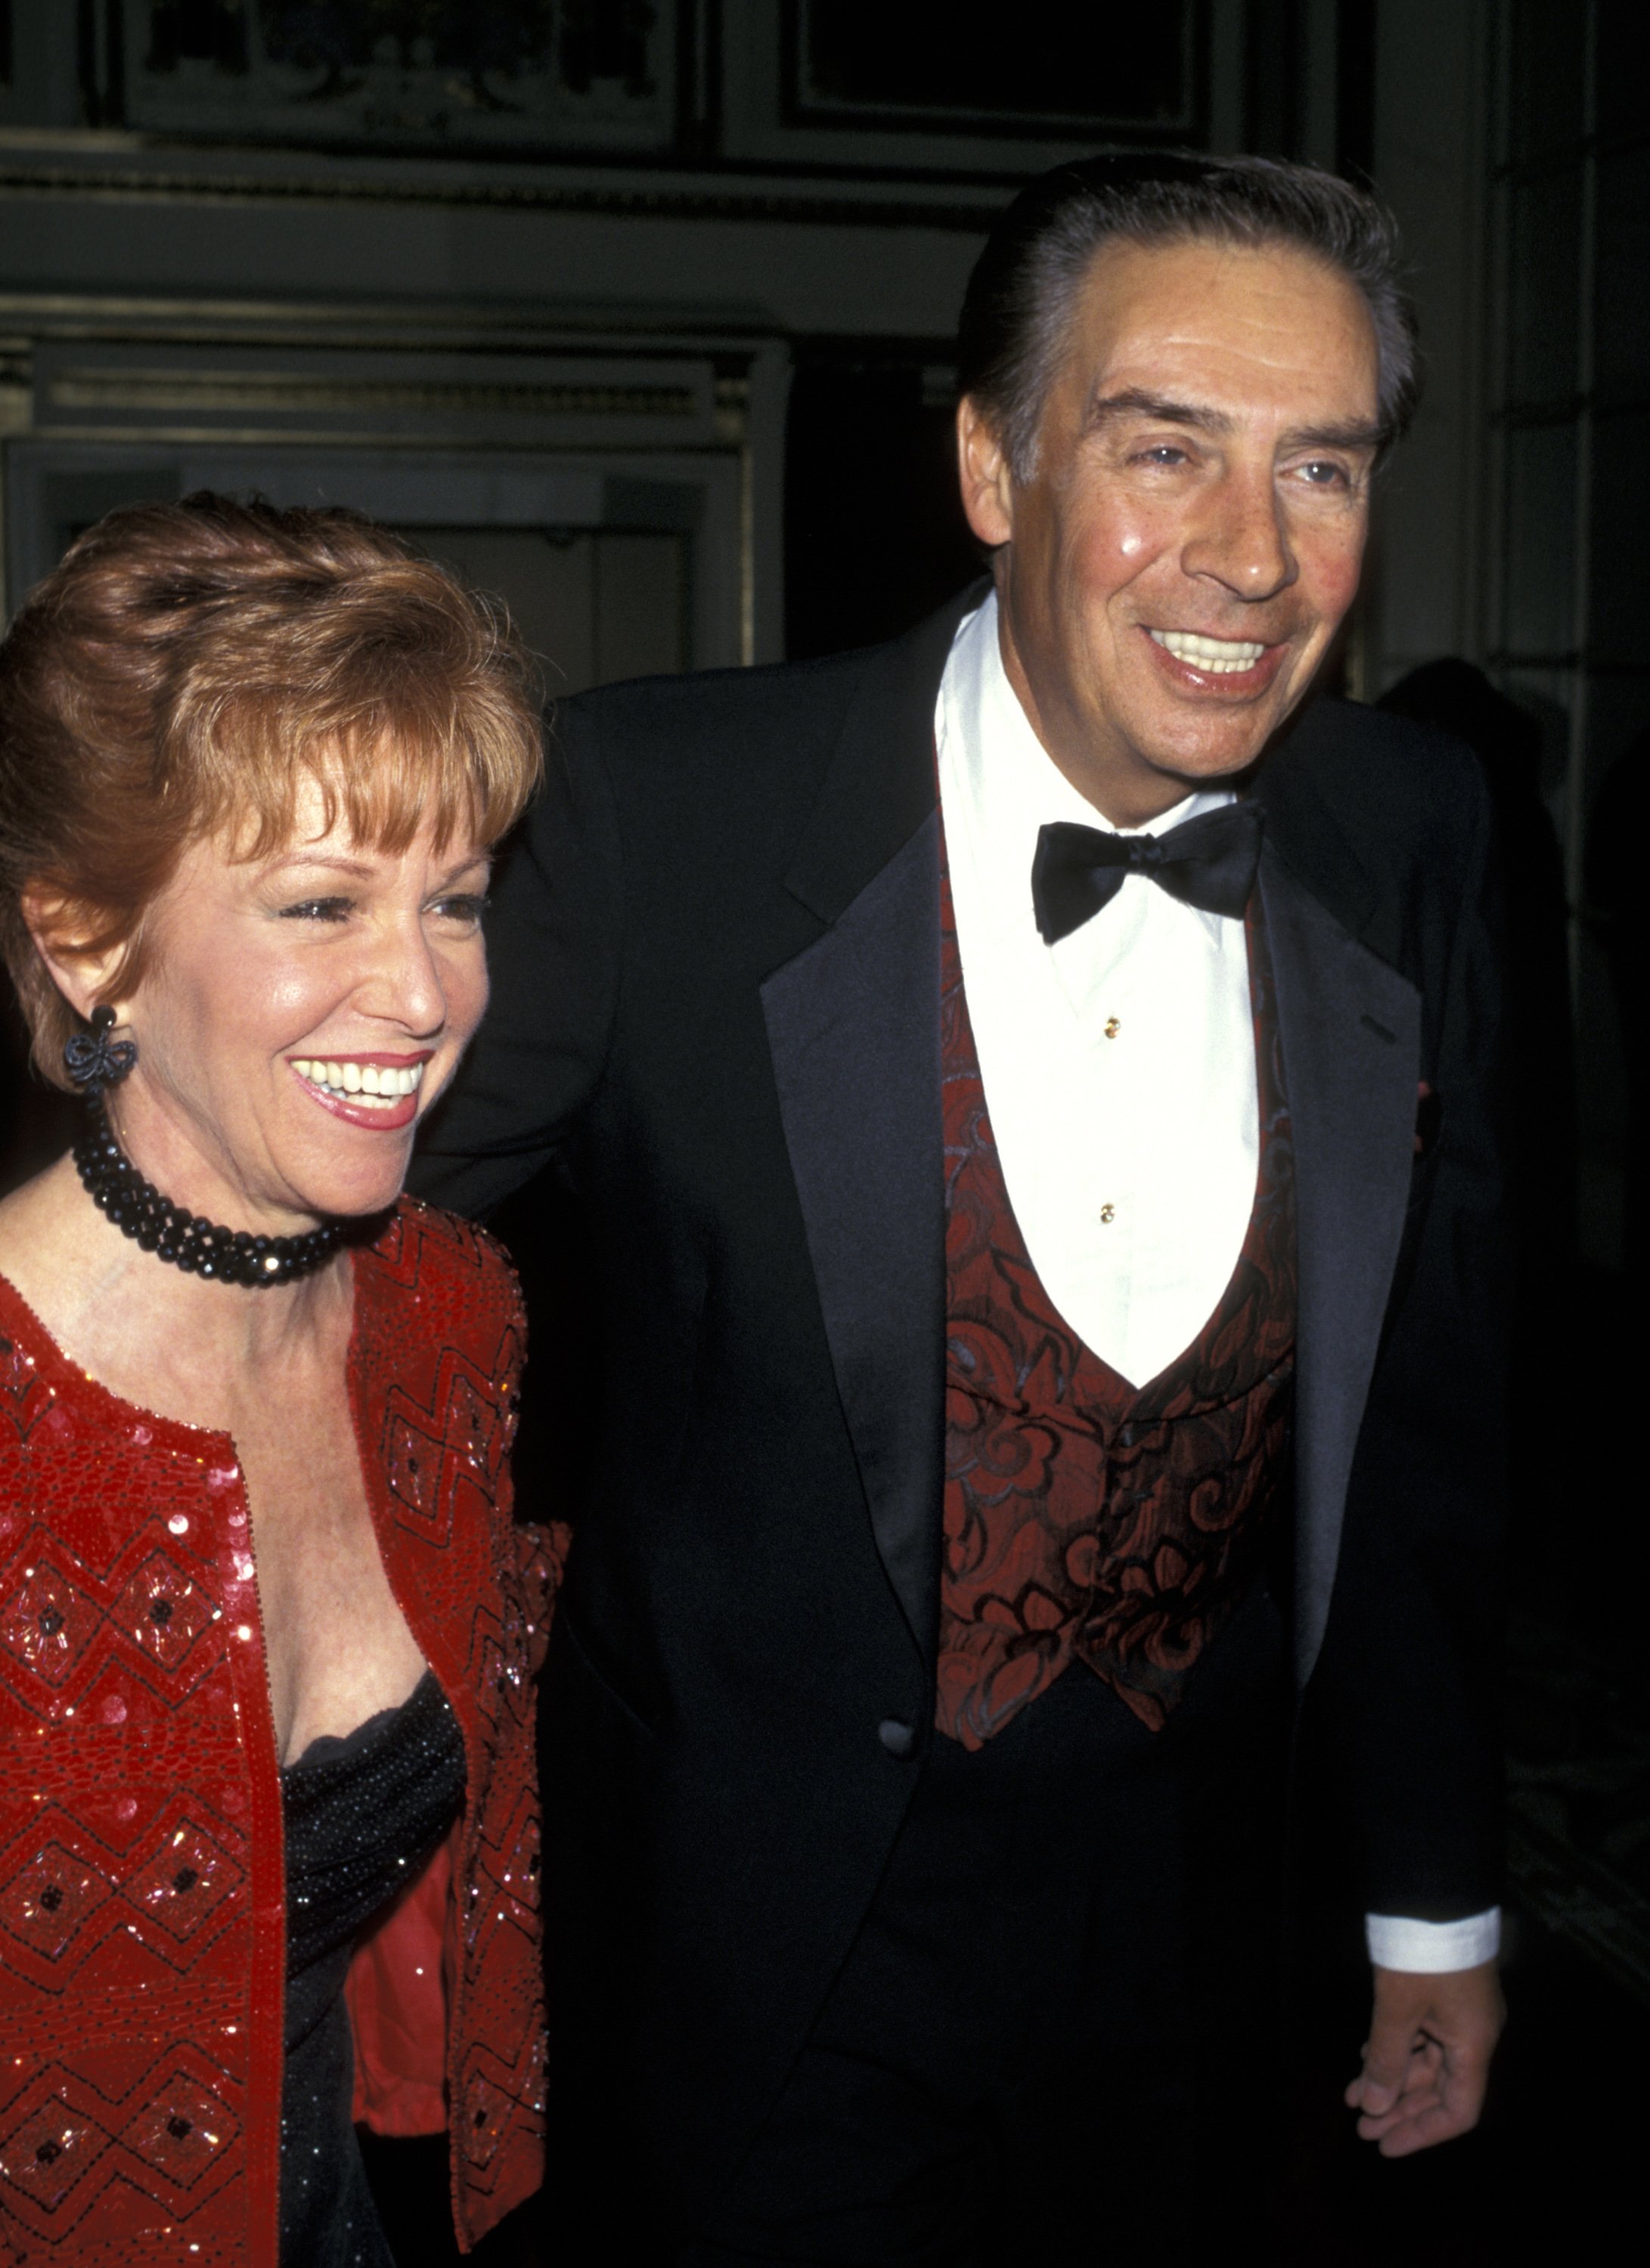 Elaine Cancilla and Jerry Orbach at the 3rd Annual Red Ball Benefit for the Childrens Advocacy Centerin New York City, on February 11, 1997 | Source: Getty Images